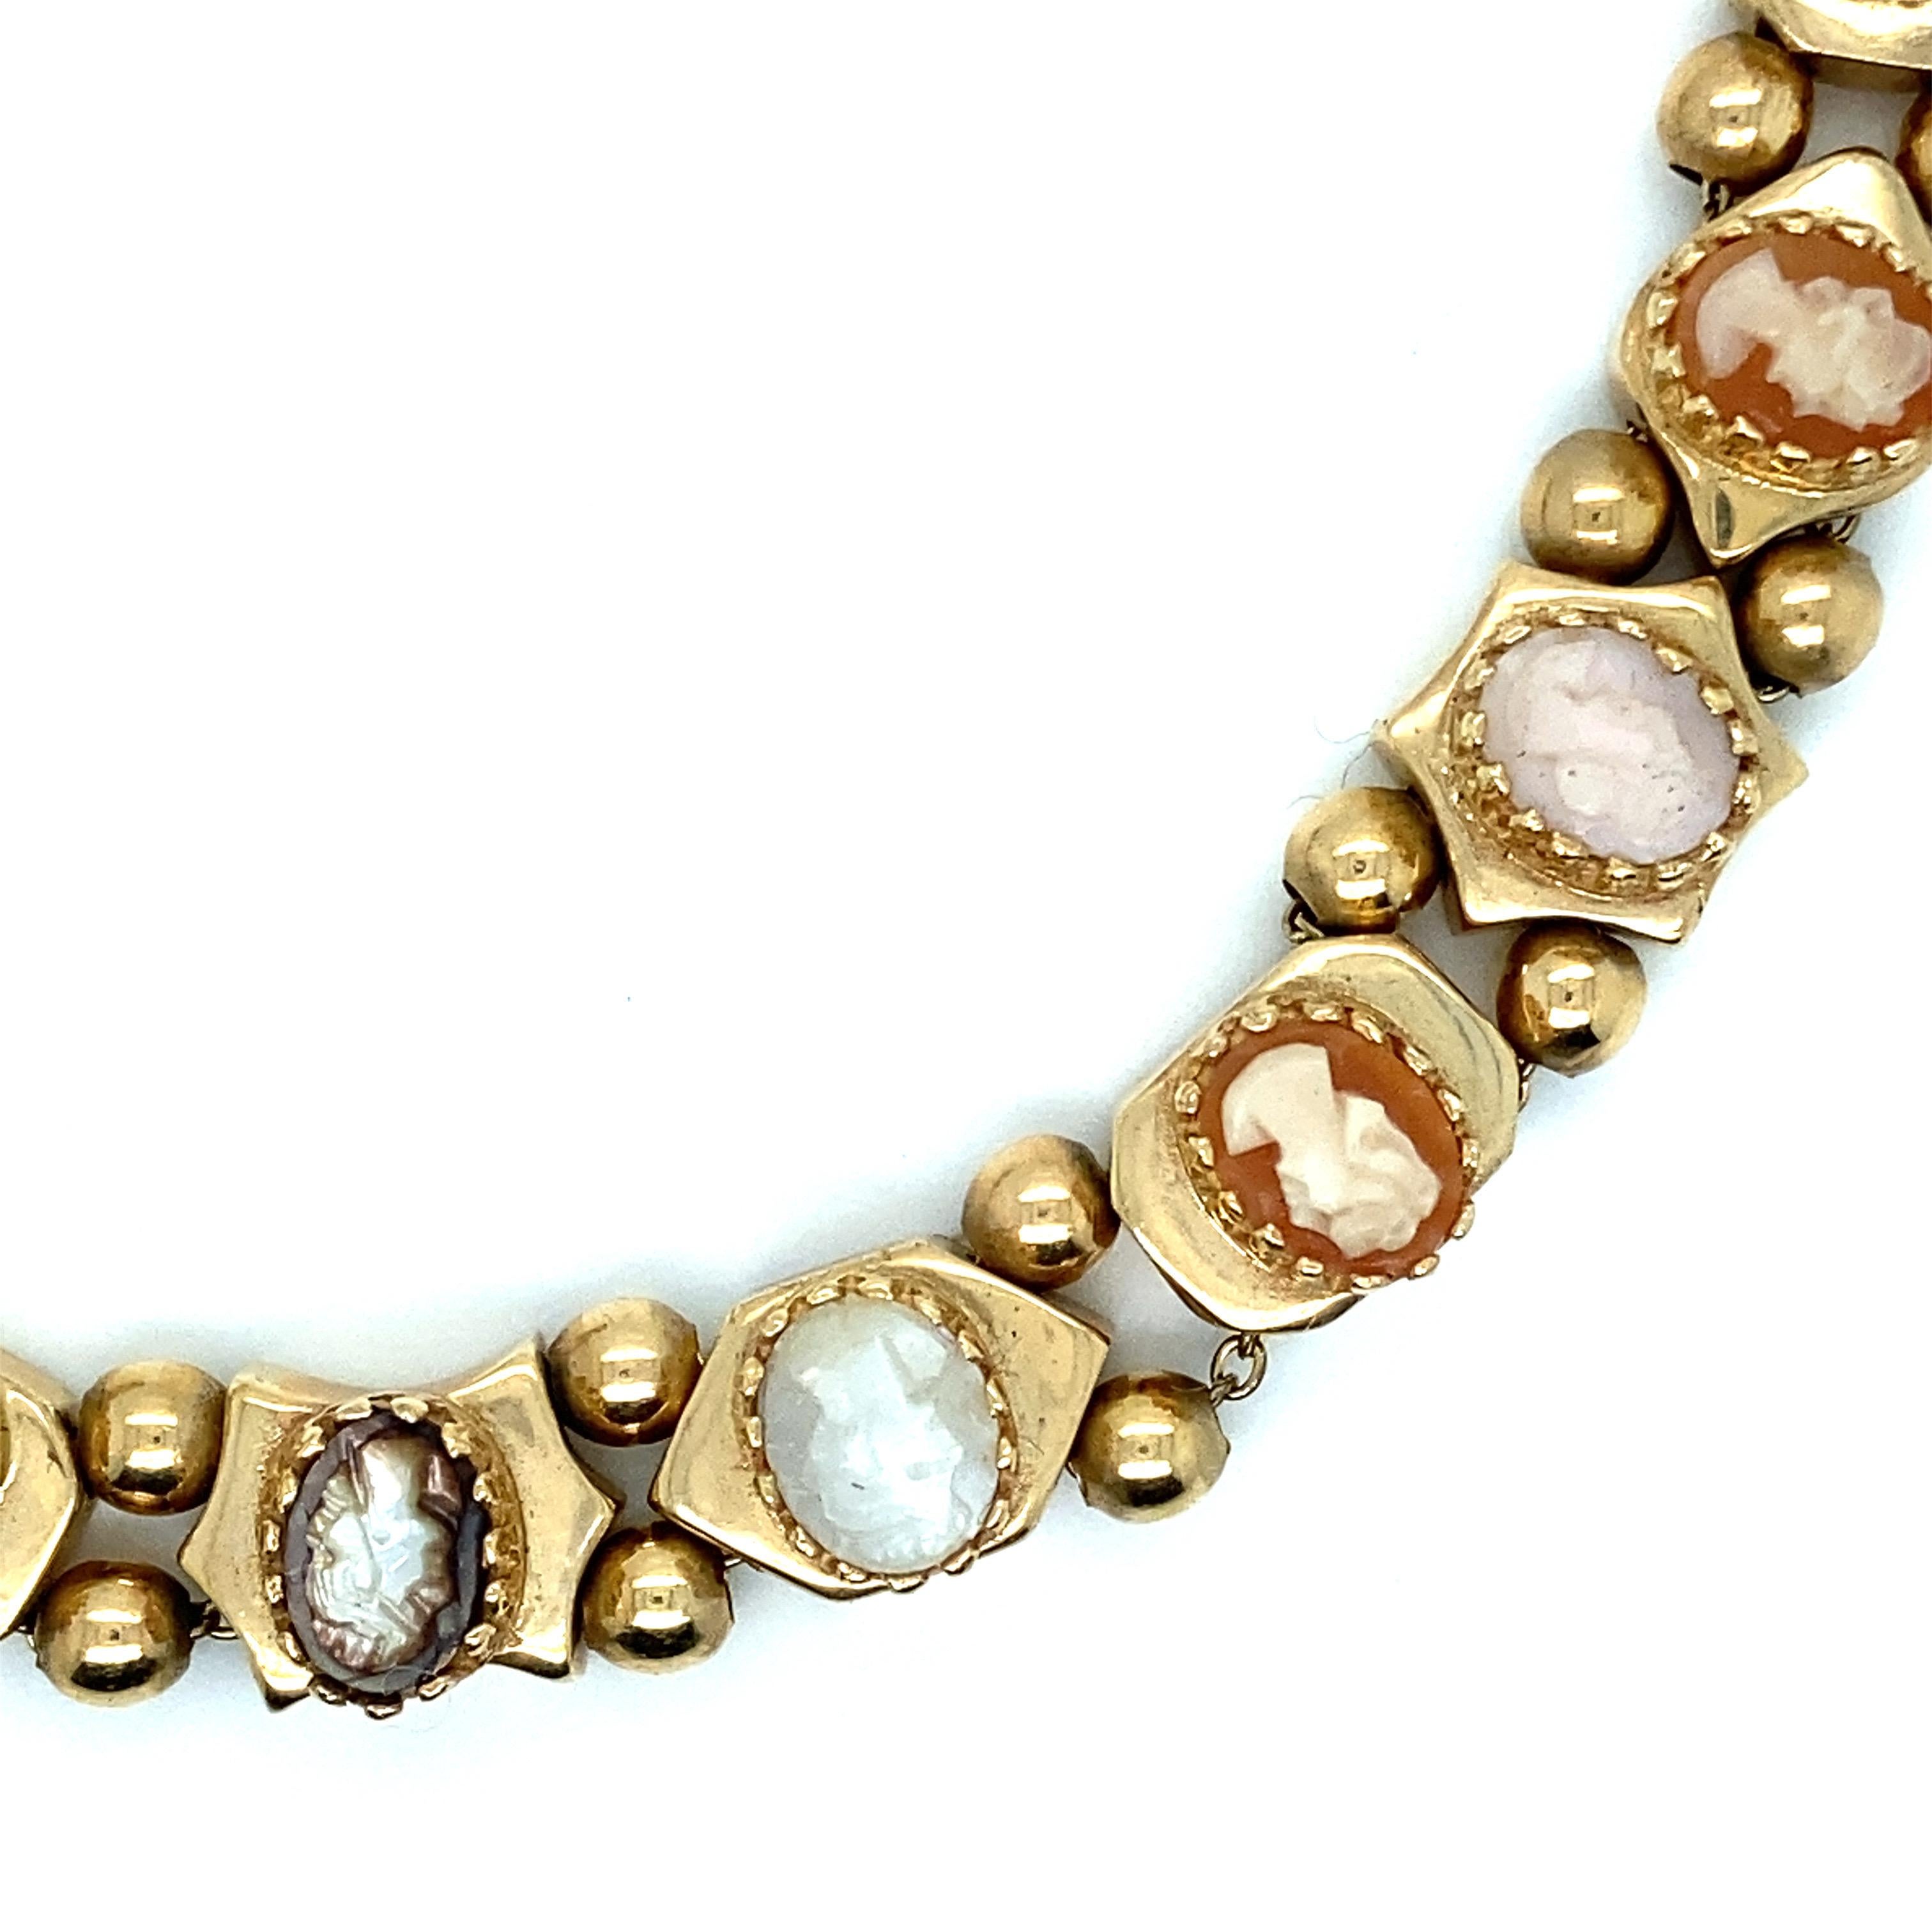 A stunning example of vintage artistry, this 14K yellow gold bracelet exudes Old World charm and elegance. Crafted meticulously with 12 exquisite cameo slides, each cameo is a miniature work of art carved from mixed color shells. The cameos depict